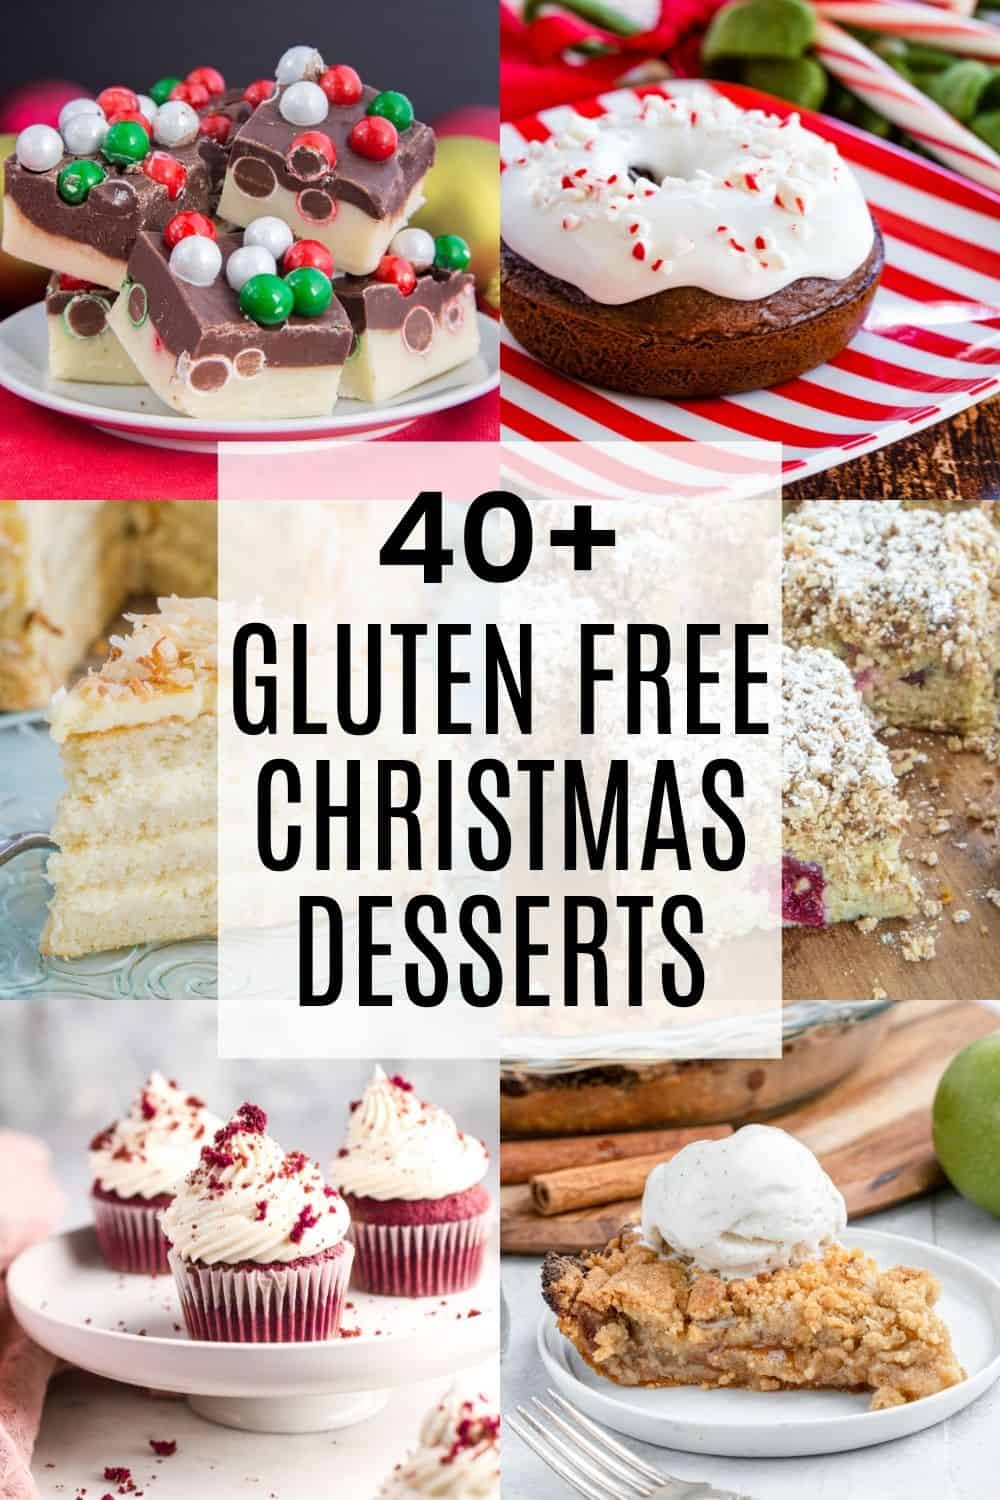 collage of Christmas desserts including fudge, apple pie, red velvet cupcakes, and more